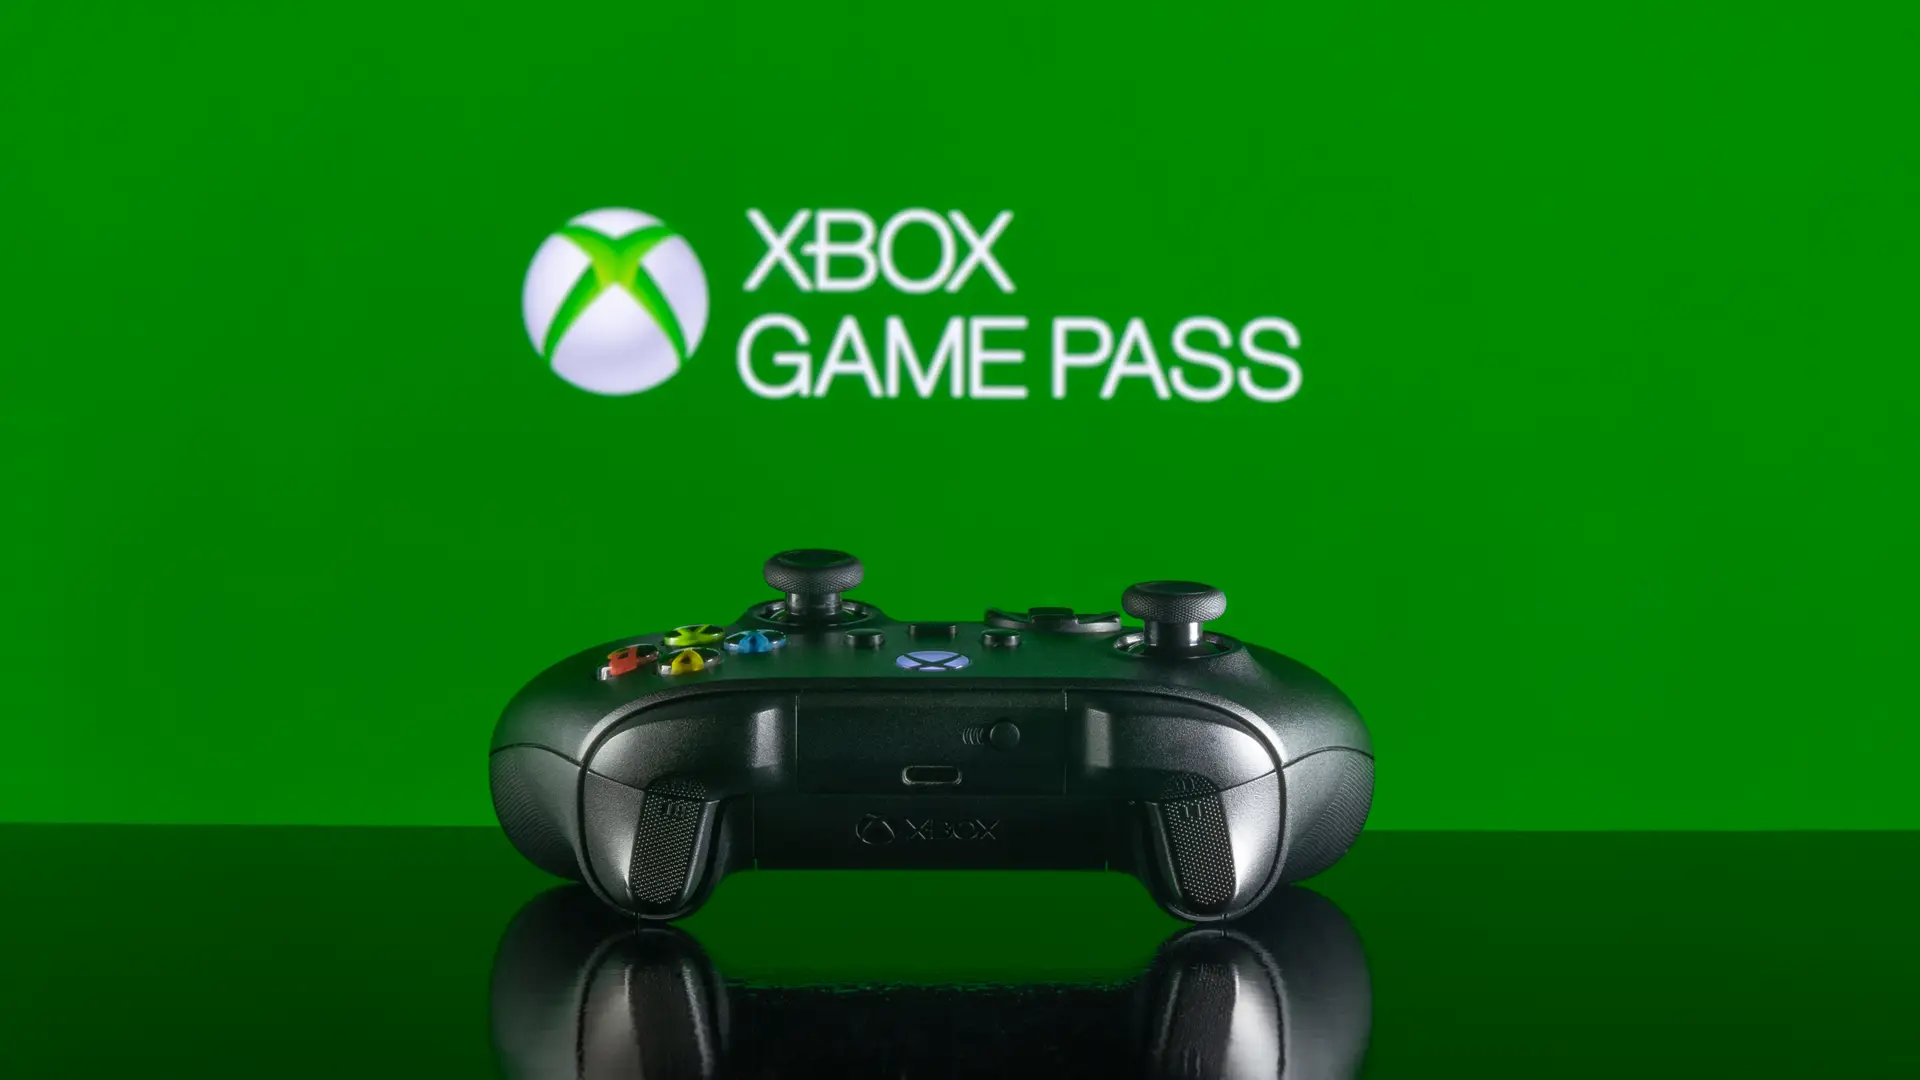 These are the new rewards that Xbox added in August to Game Pass Ultimate